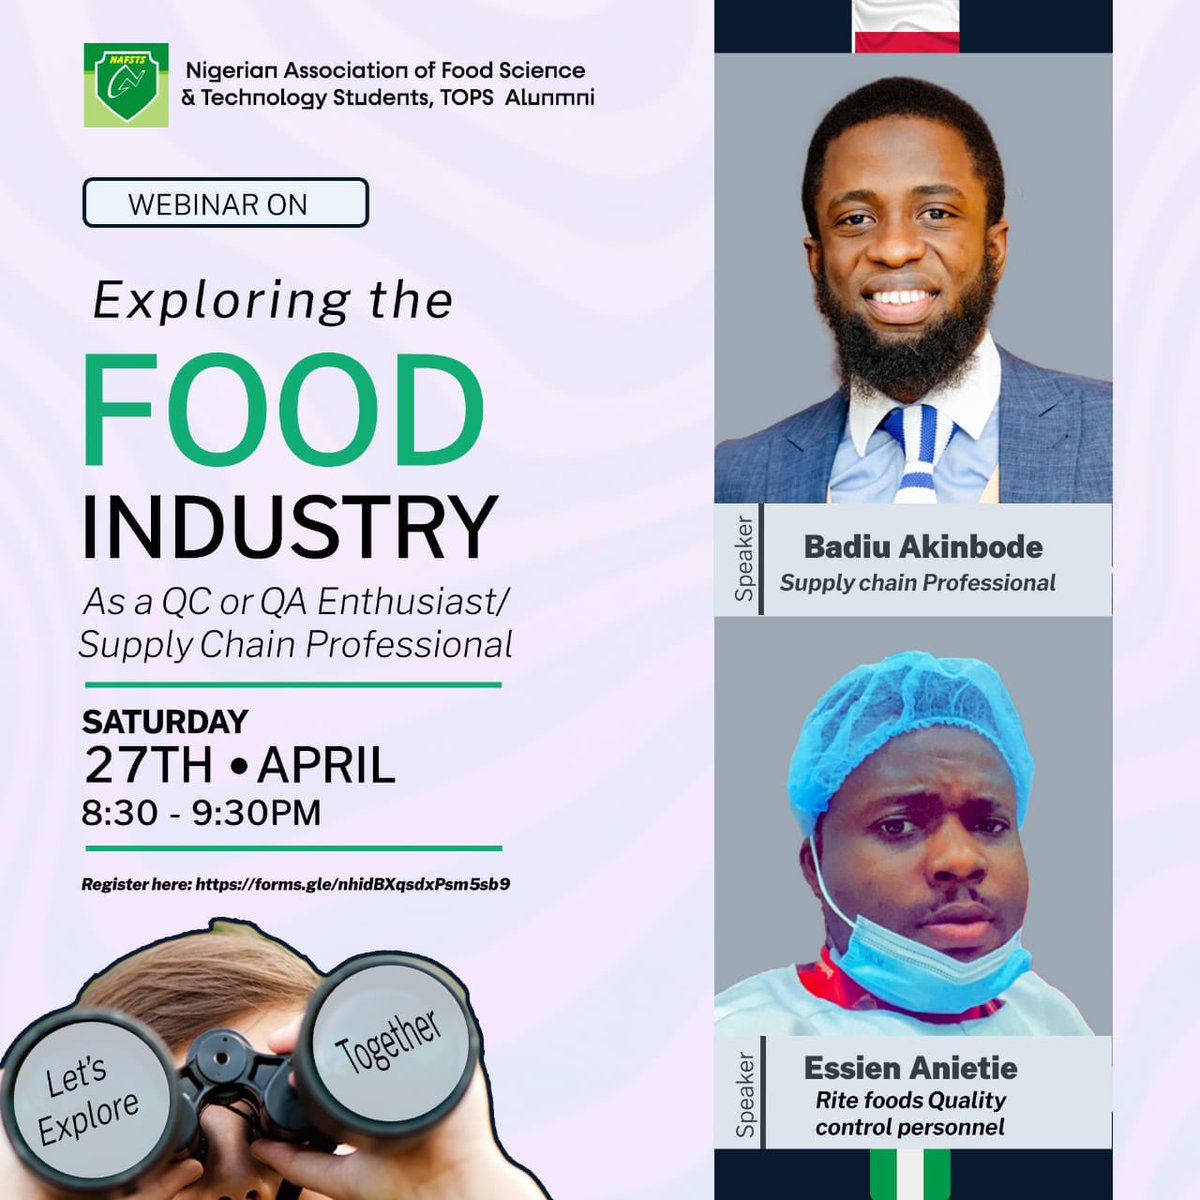 Away from the Scholarship realm, great to start having talks surrounding career in FMCG Are you a fresh graduate in food technology & its related course who’s interested in exploring the food industry as a QC/QA & supply chain professional? This webinar gives you a pragmatic